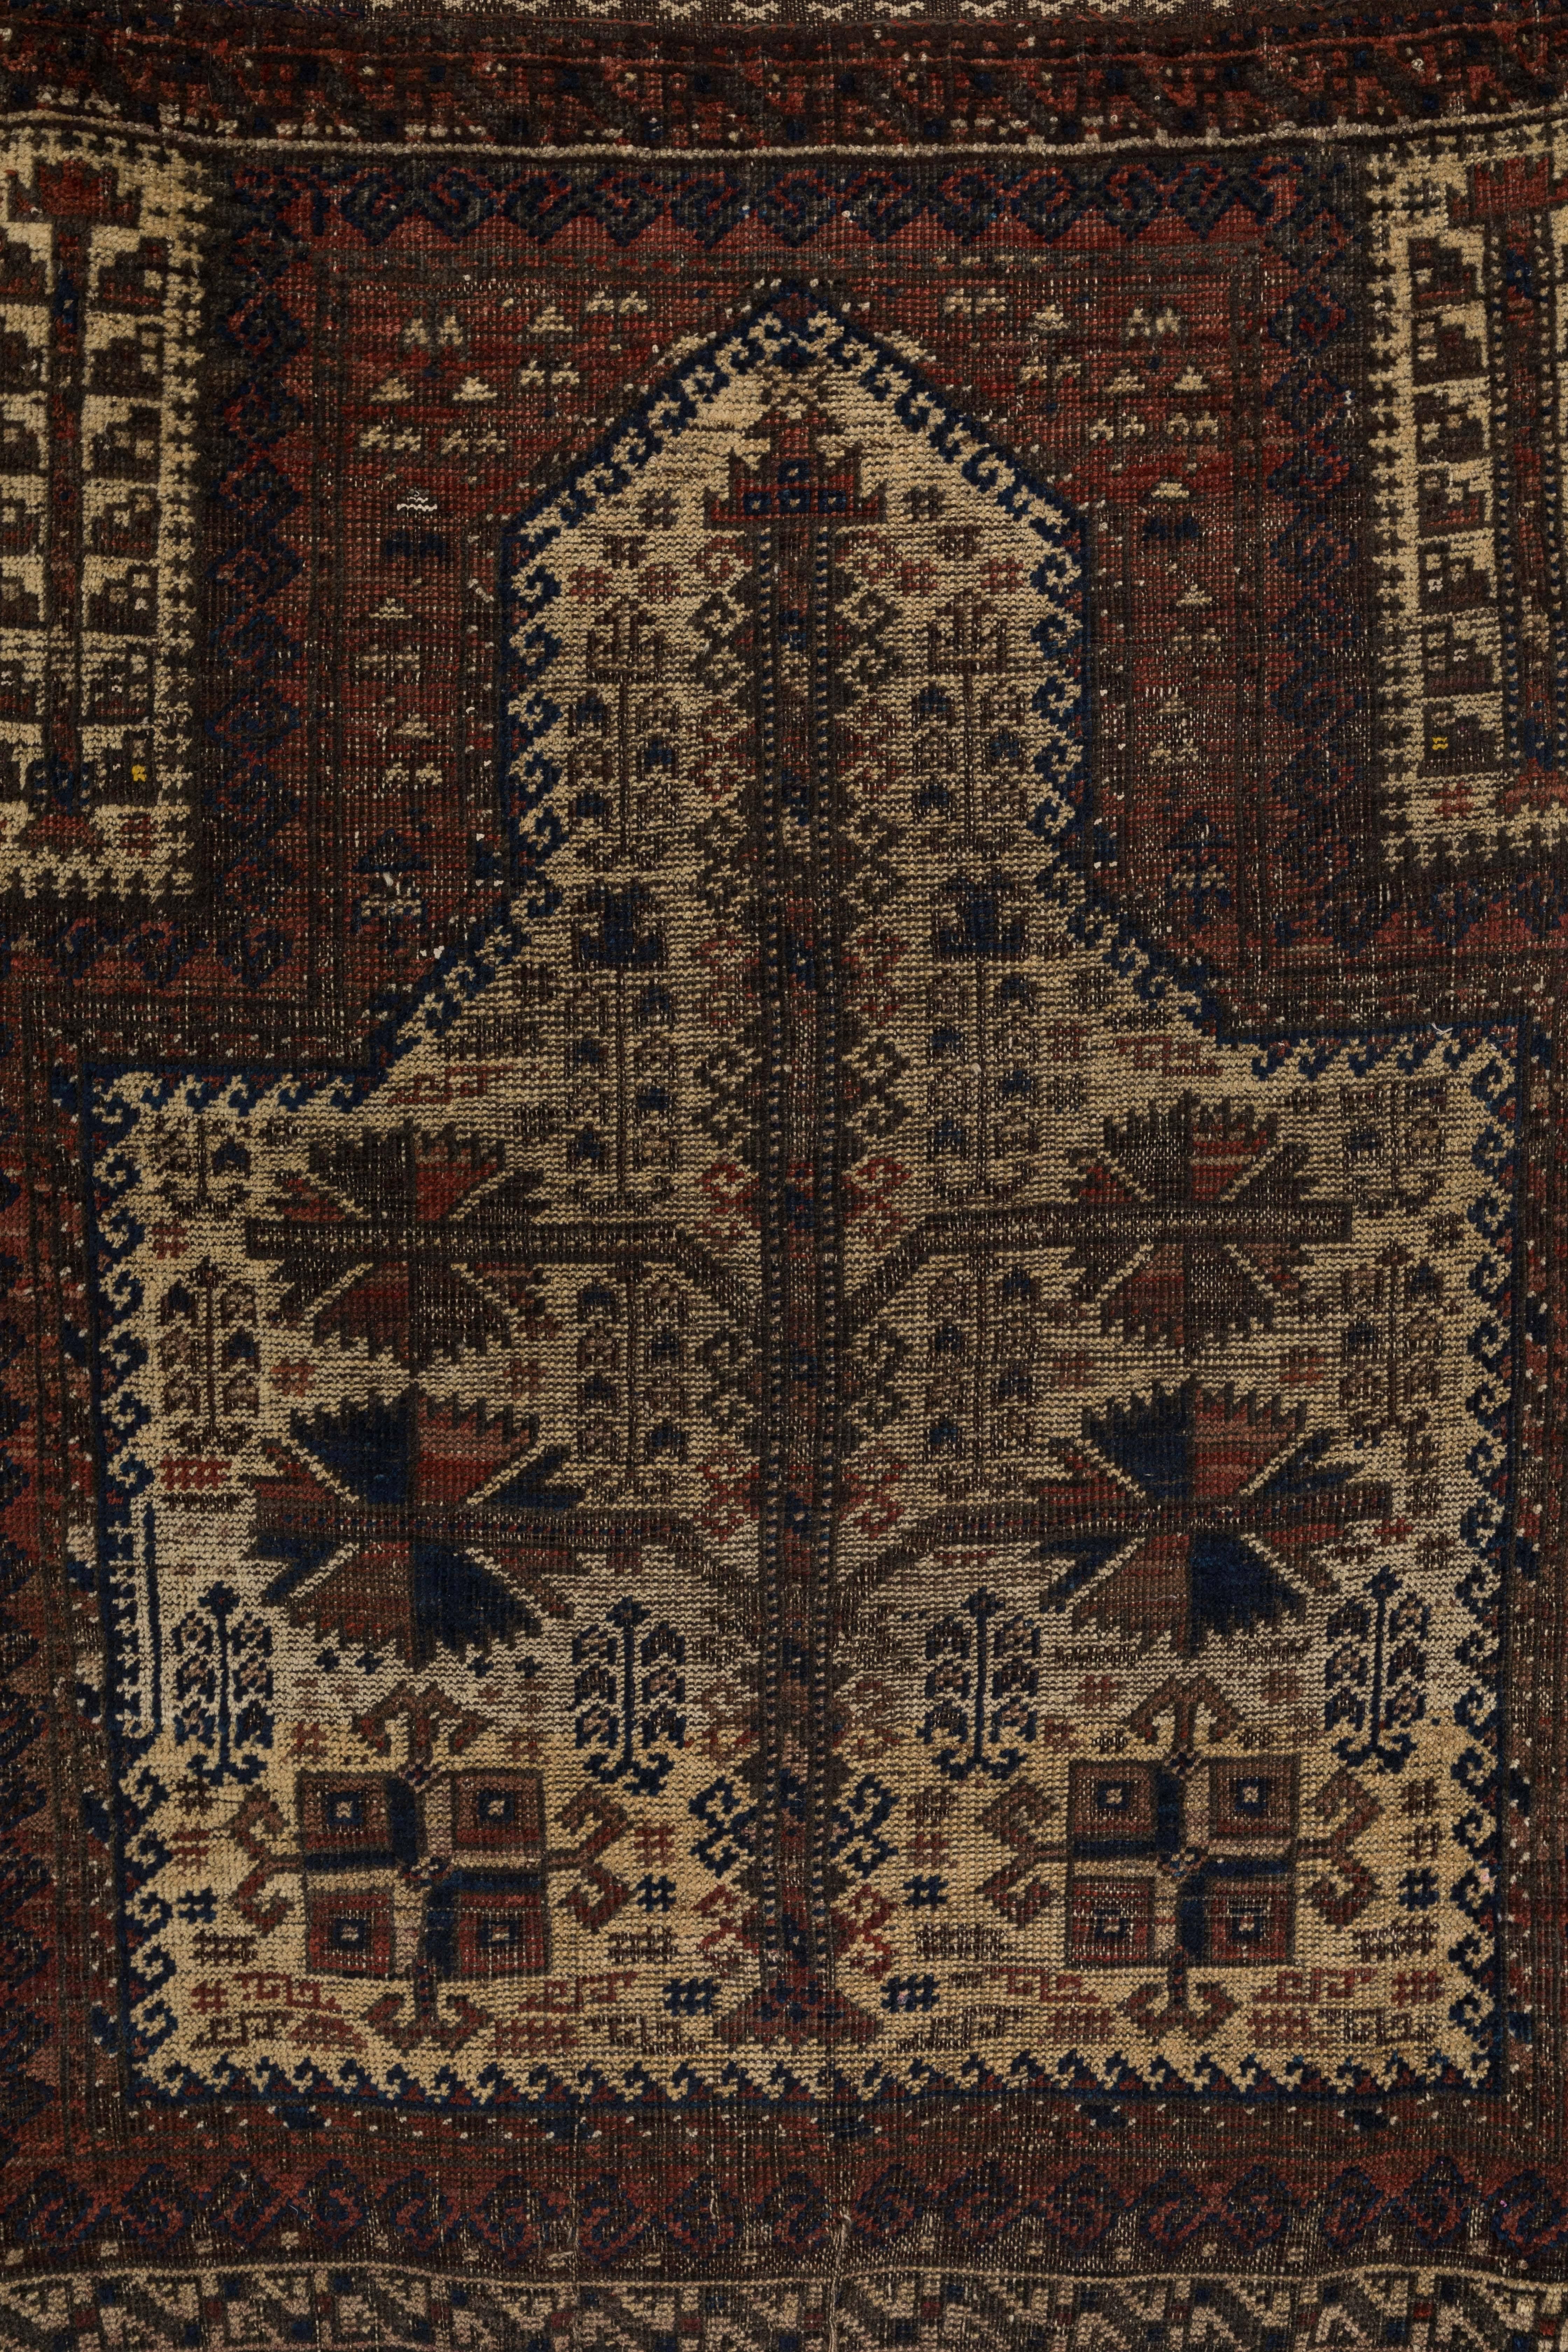 Baluchi prayer rug. Made by nomadic tribes in Iran and Pakistan. Low but even pile and unusual white ground. Ends complete. 100% wool. Soft handle.  Offered at .